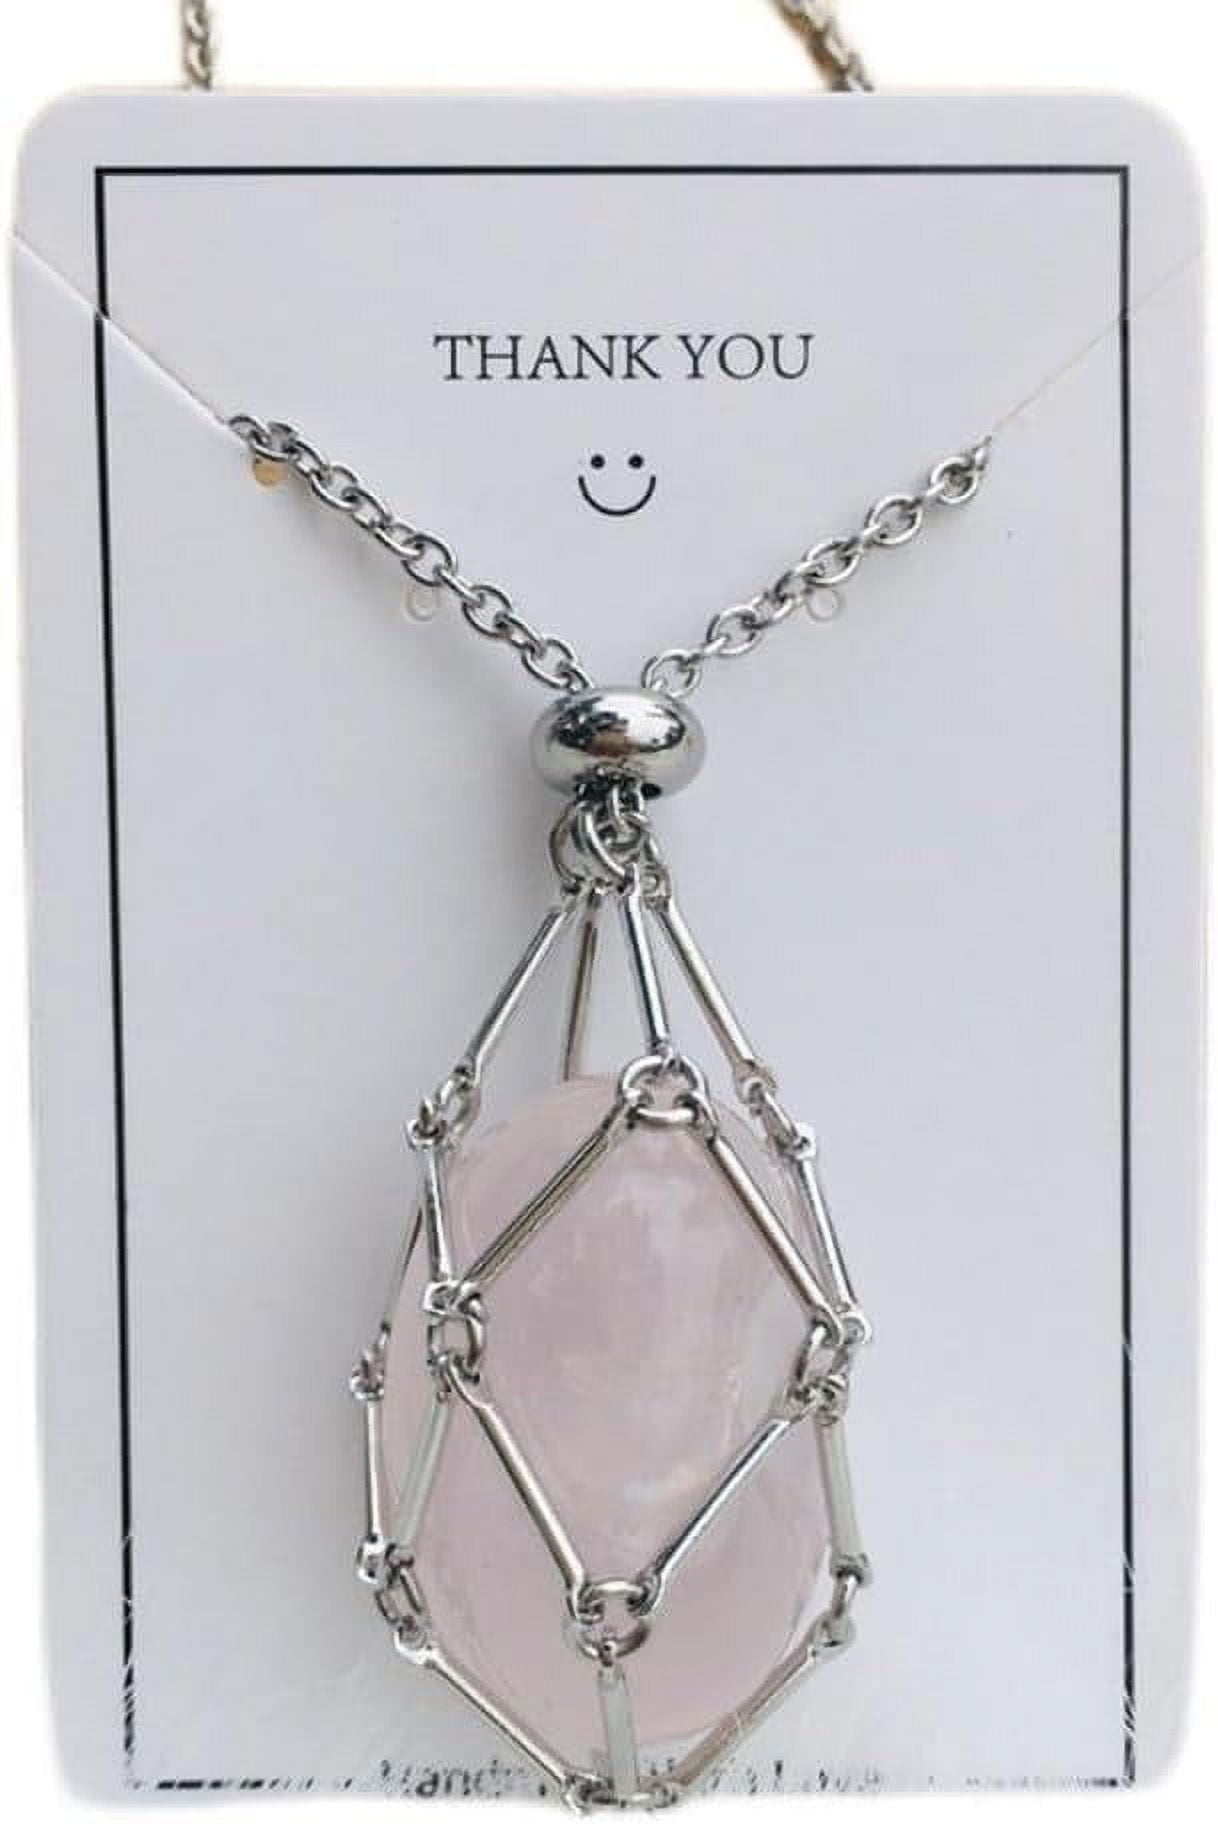 Interchangeable Crystal Holder Cage Necklace Silver Color Stone Holder  Necklace Daily Wear – the best products in the Joom Geek online store